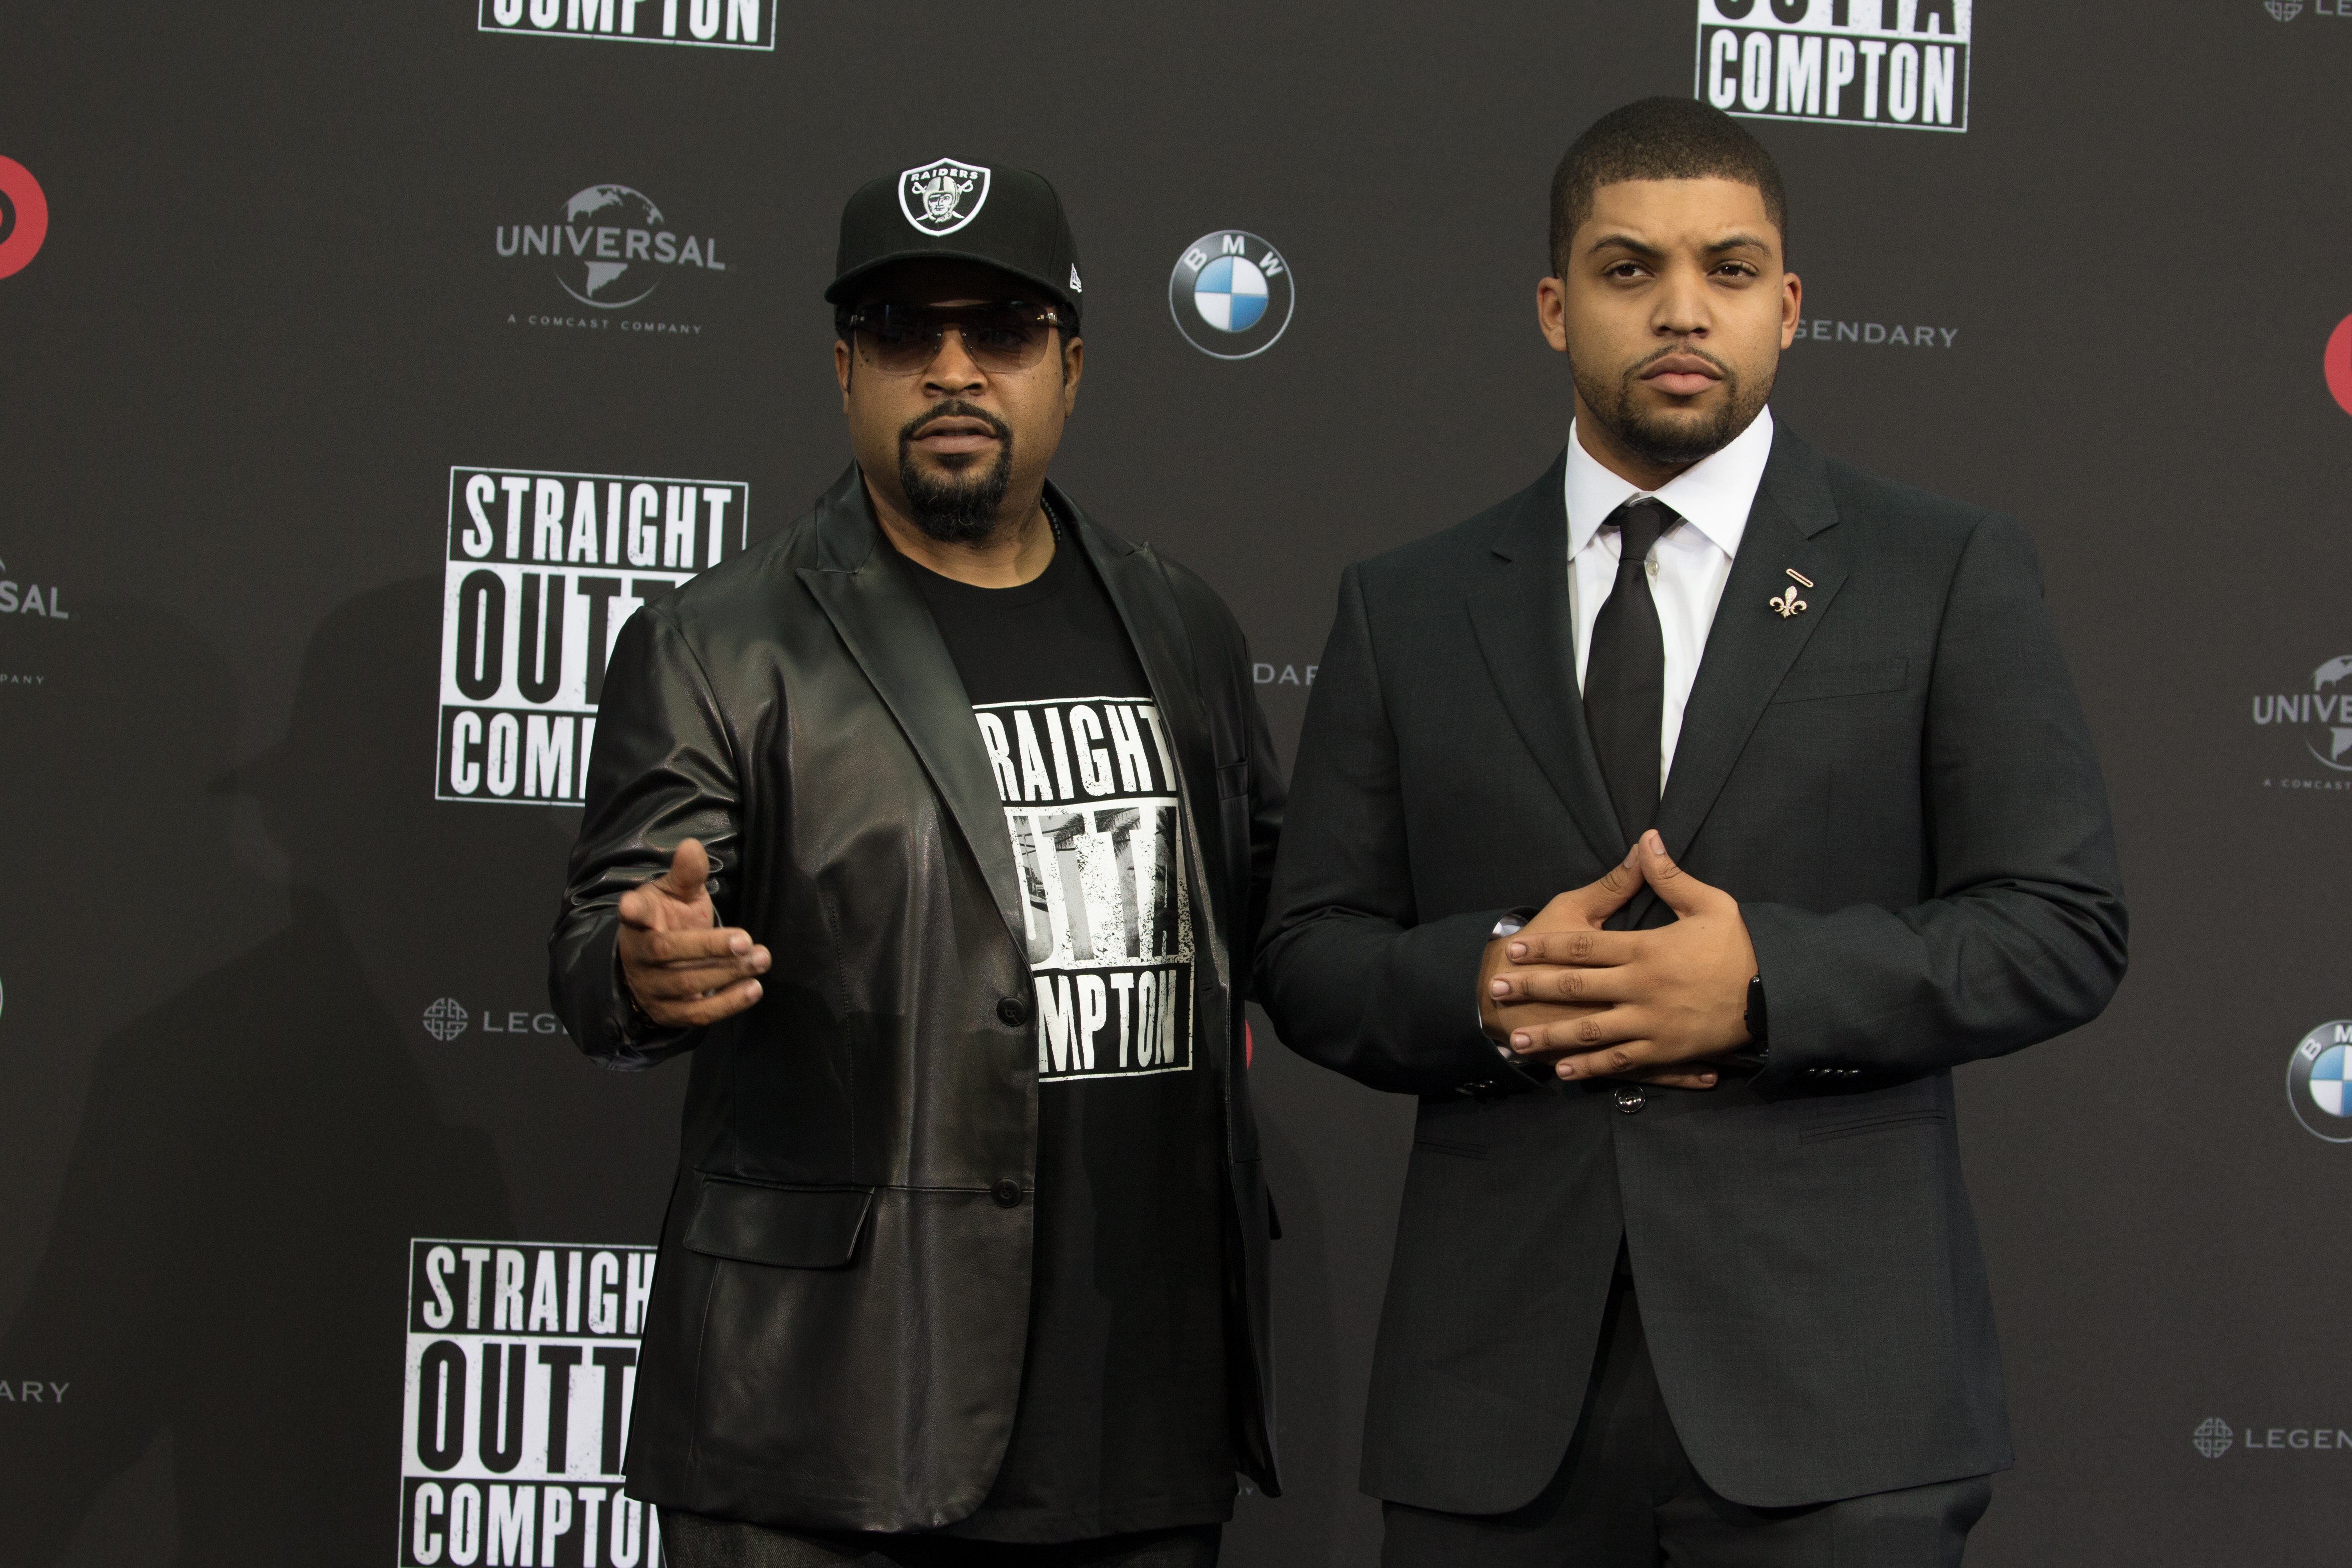 Ice Cube and son O'Shea Jackson Jr. at 'Straight Outta Compton' premiere